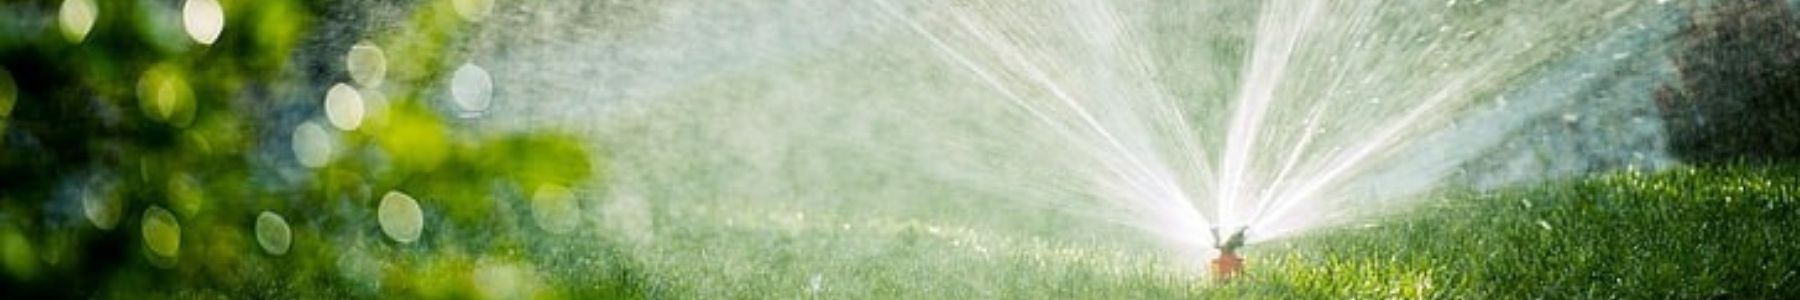 Garden Hoses Fittings and Sprinklers